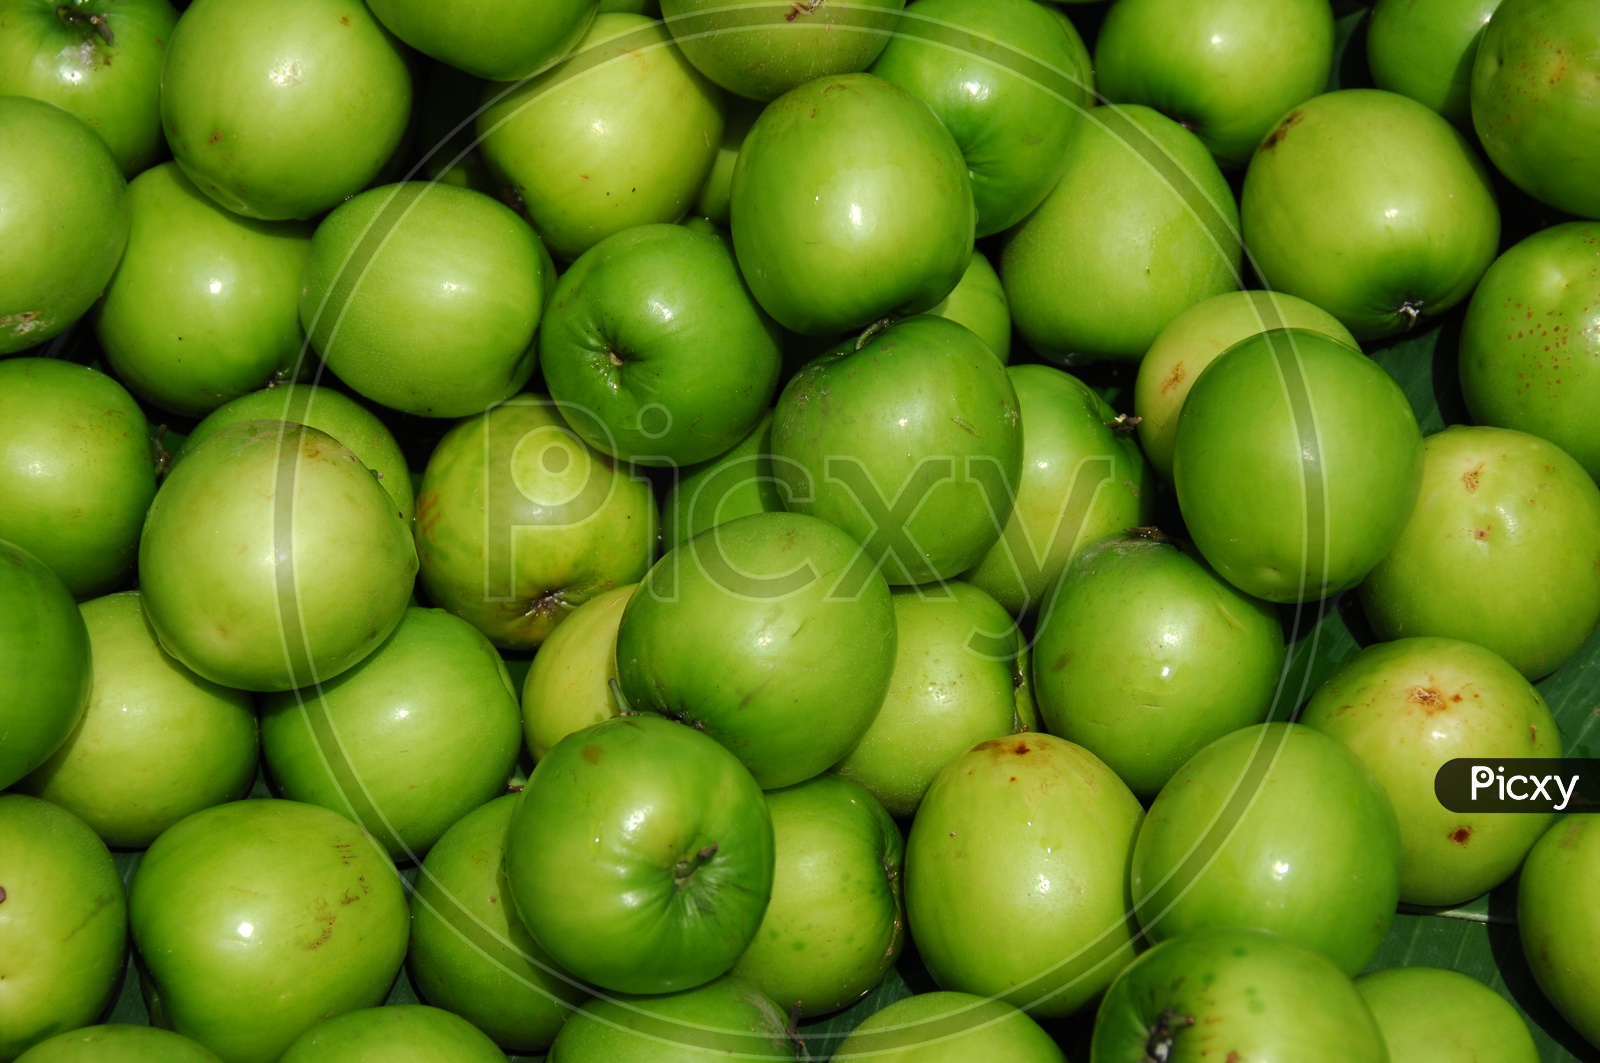 Photograph of Green Apples